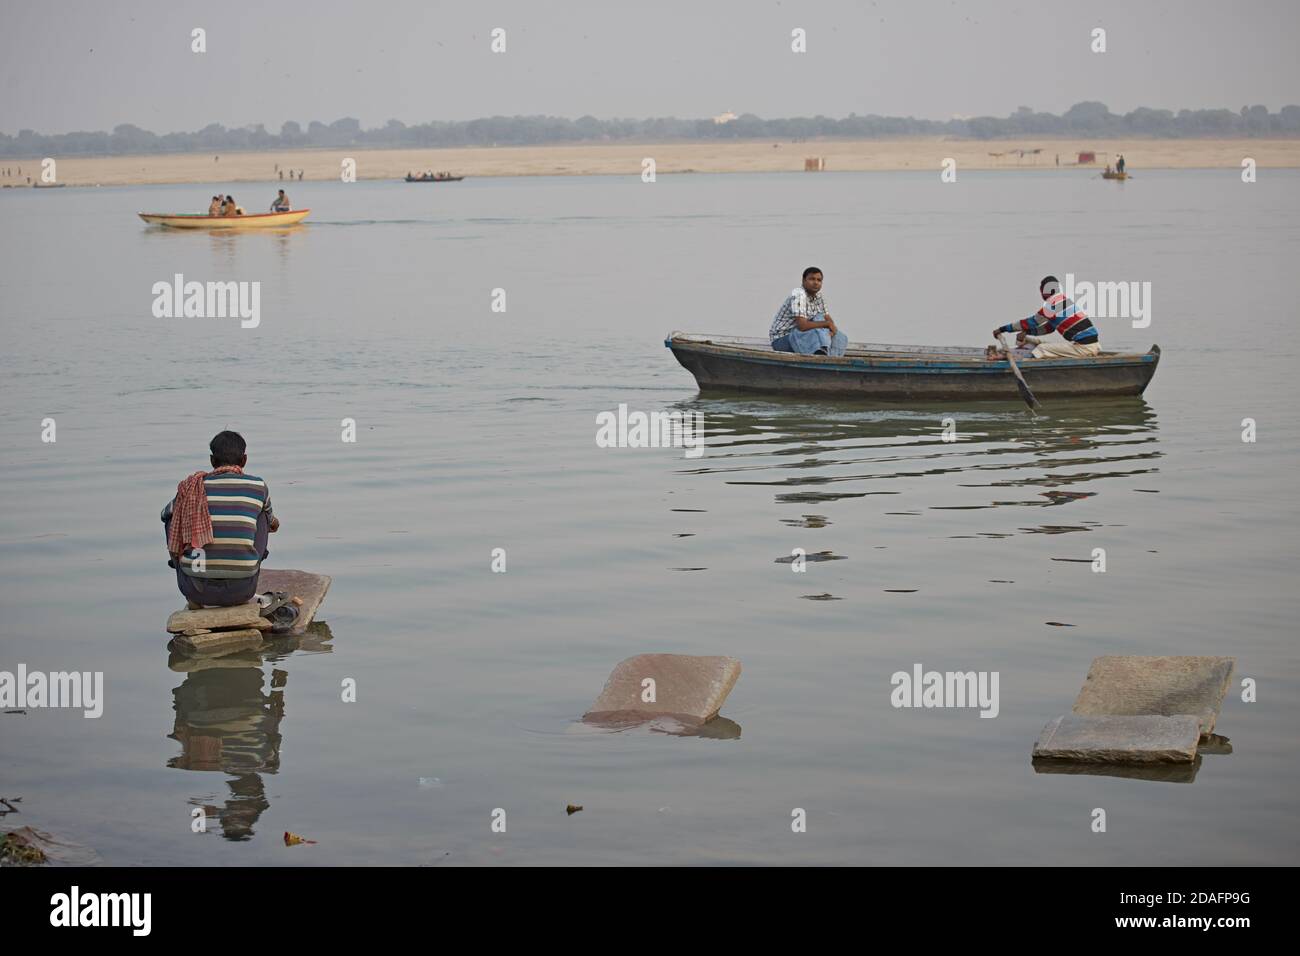 Varanasi, India, December 2015. A rowboat passes in front of a man sitting on a washing stone in a Ganges river ghat. Stock Photo